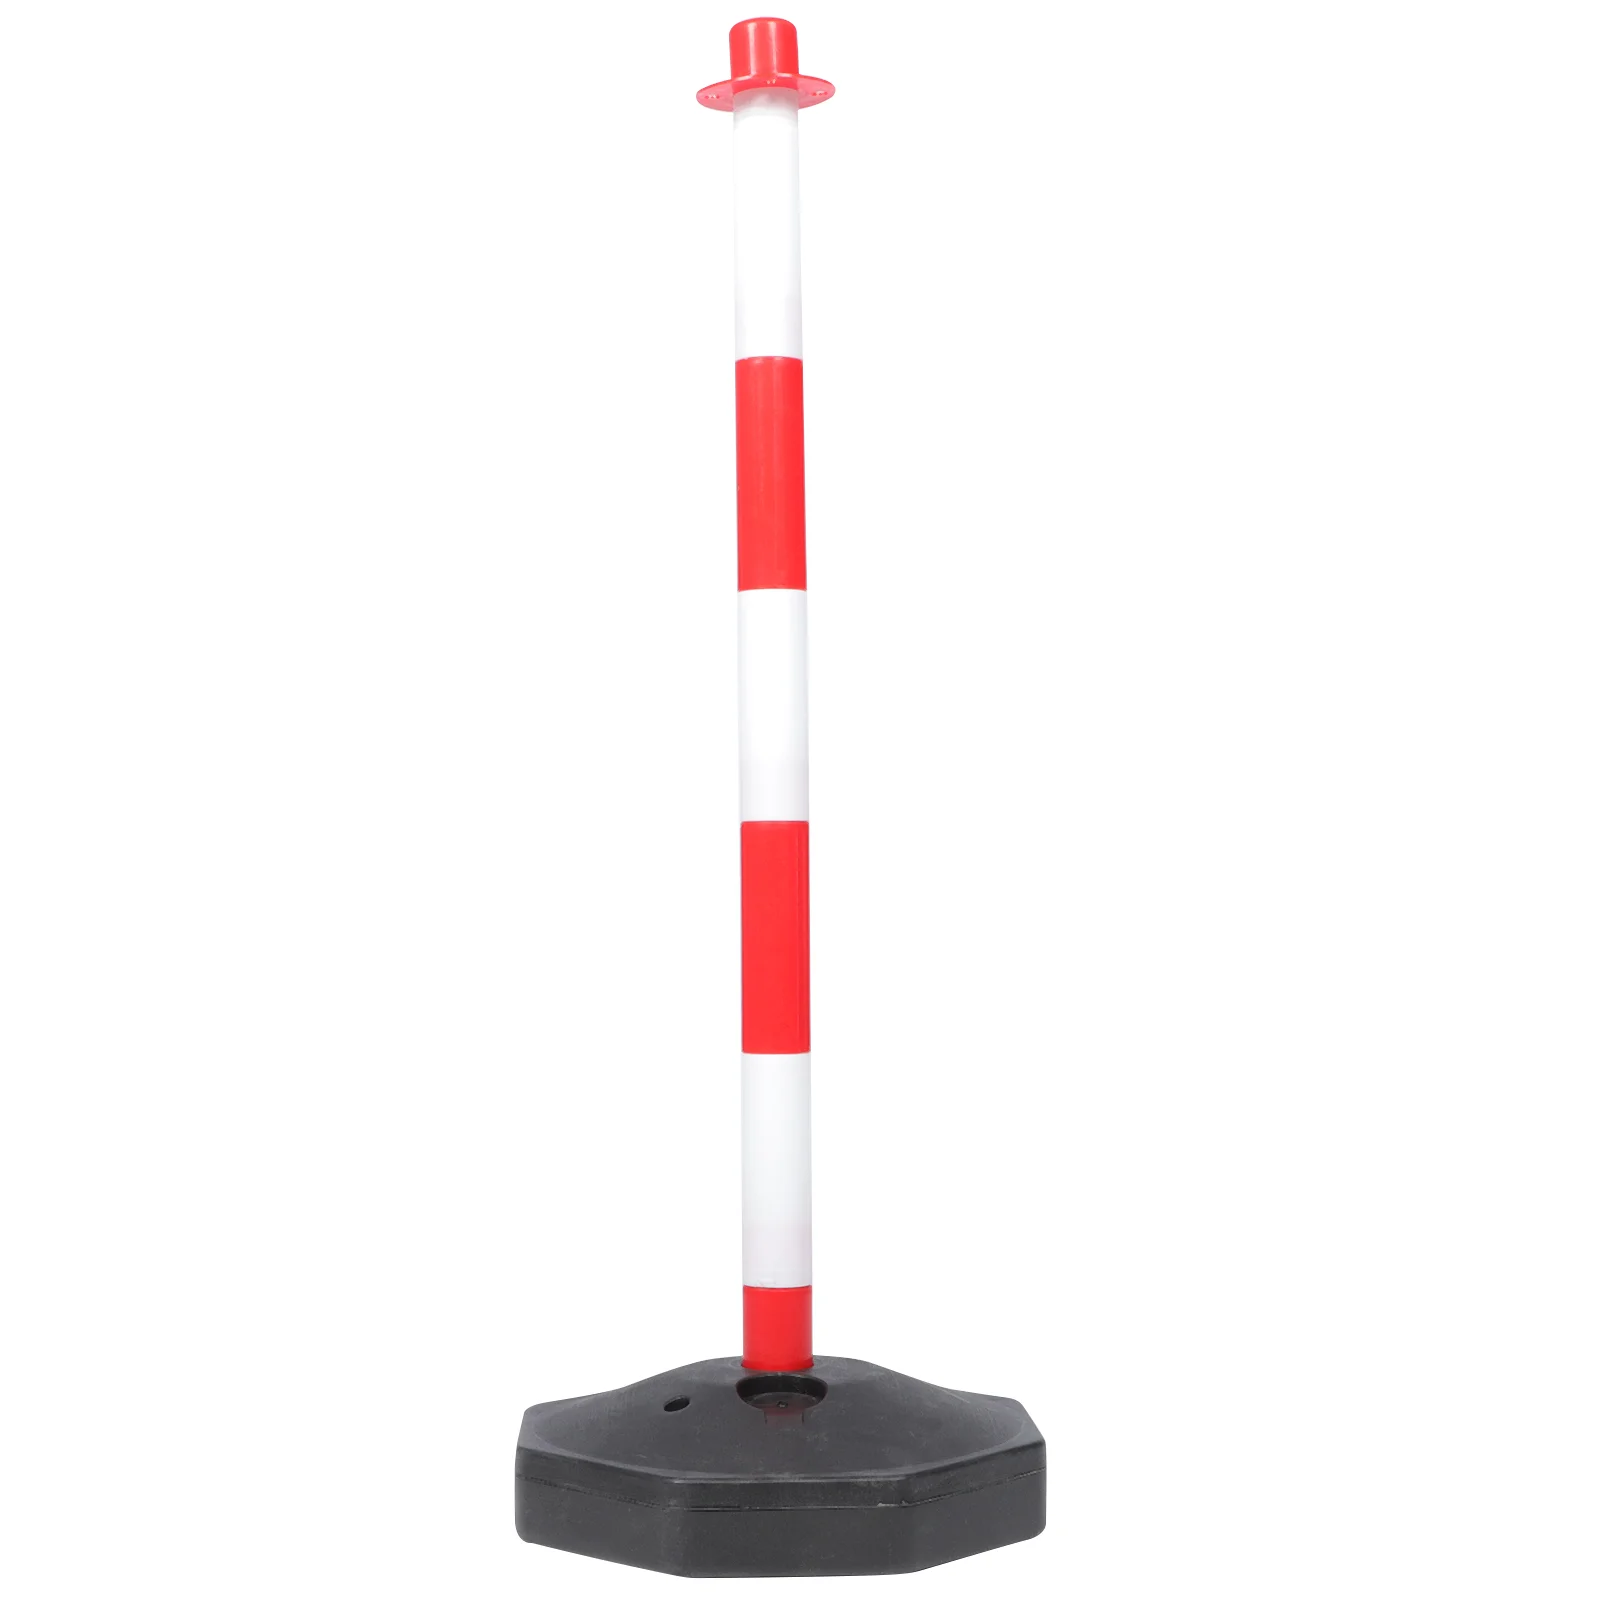 

Traffic Safety Post Parking Delineator Barrier Bollard Cones Warning Road Cone Poles Stanchion Pole Column Base Sign Barricade